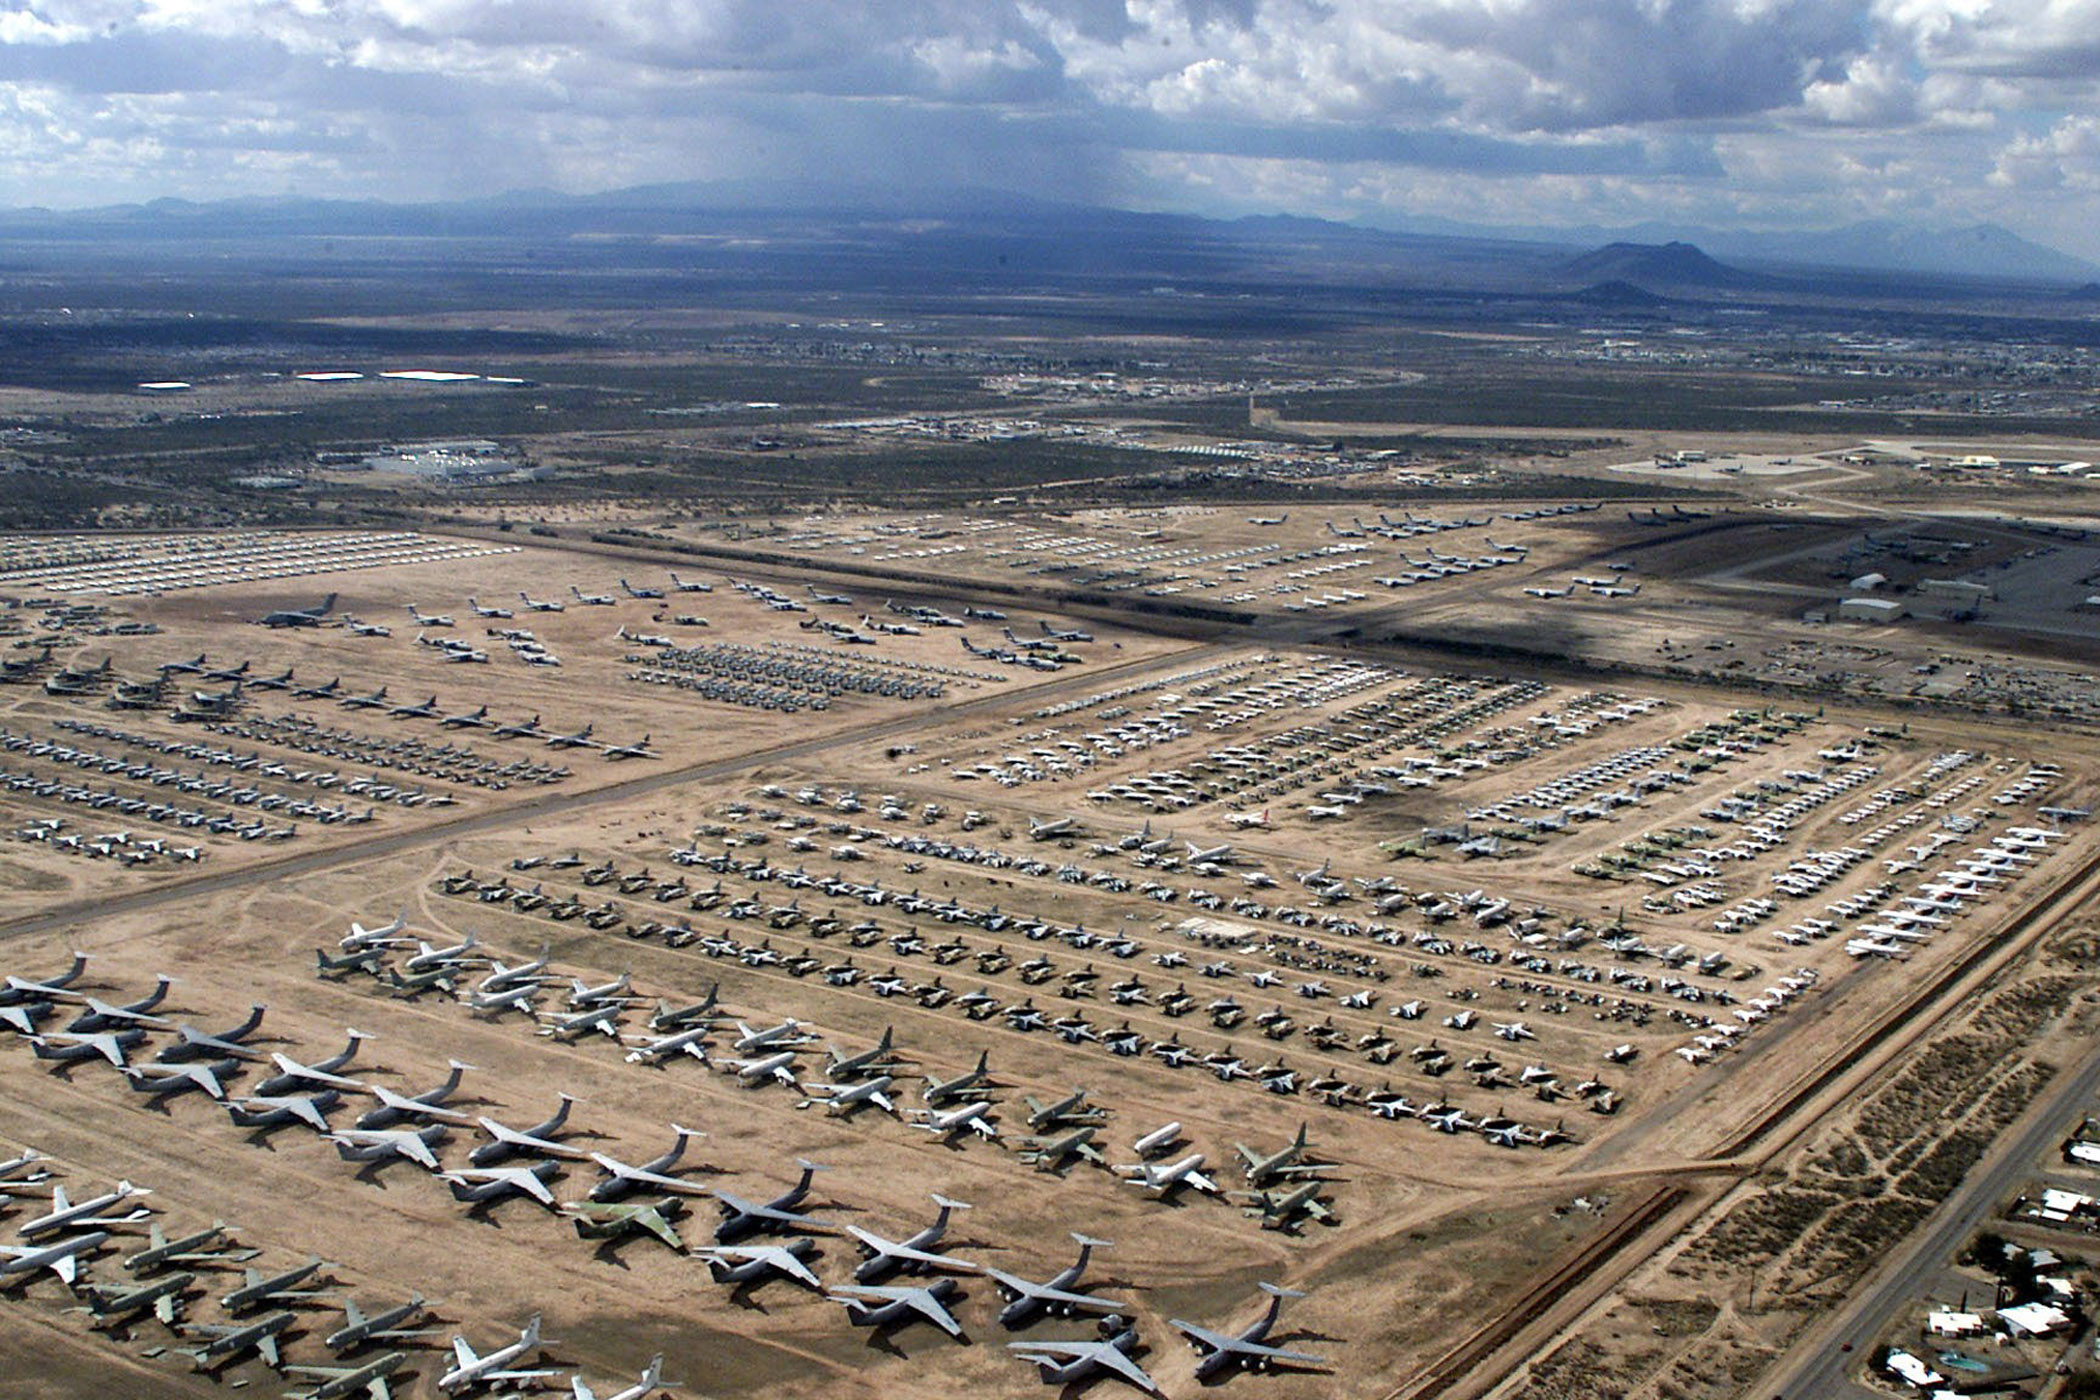 US Navy 040204-N-3122S-004 An aerial image of the Aerospace Maintenance and Regeneration Center (AMARC) located on the Davis-Monthan Air Force Base in Tucson, Ariz